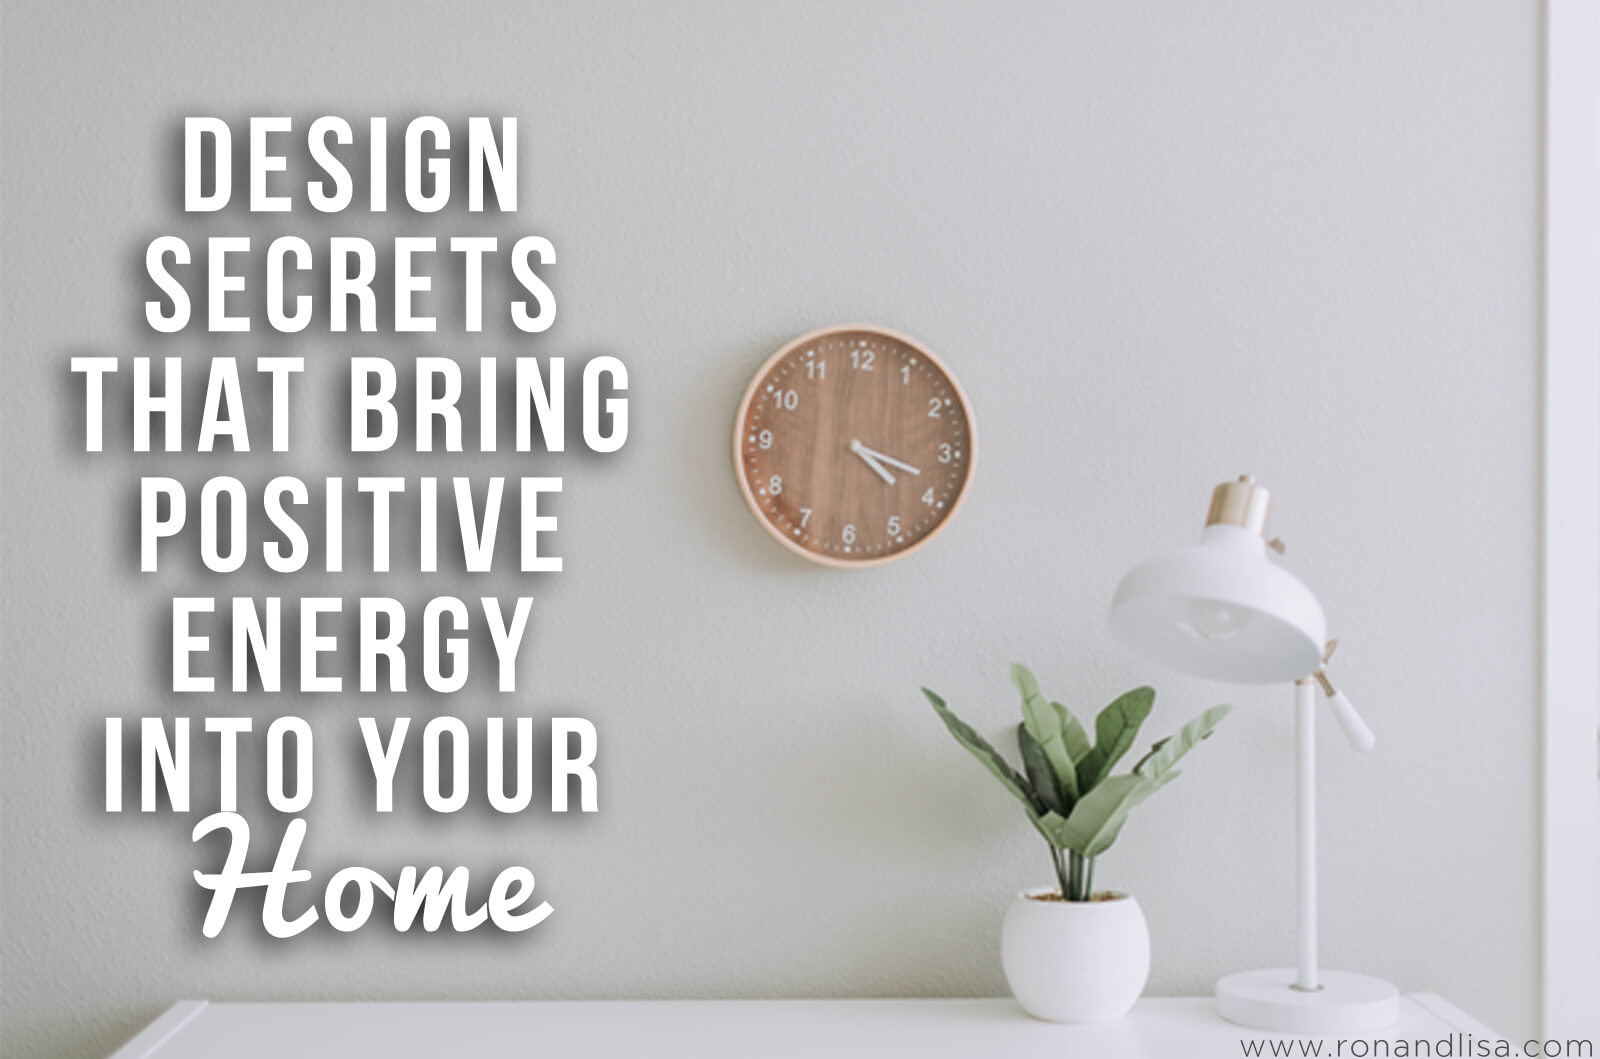 Design Secrets That Bring Positive Energy Into Your Home